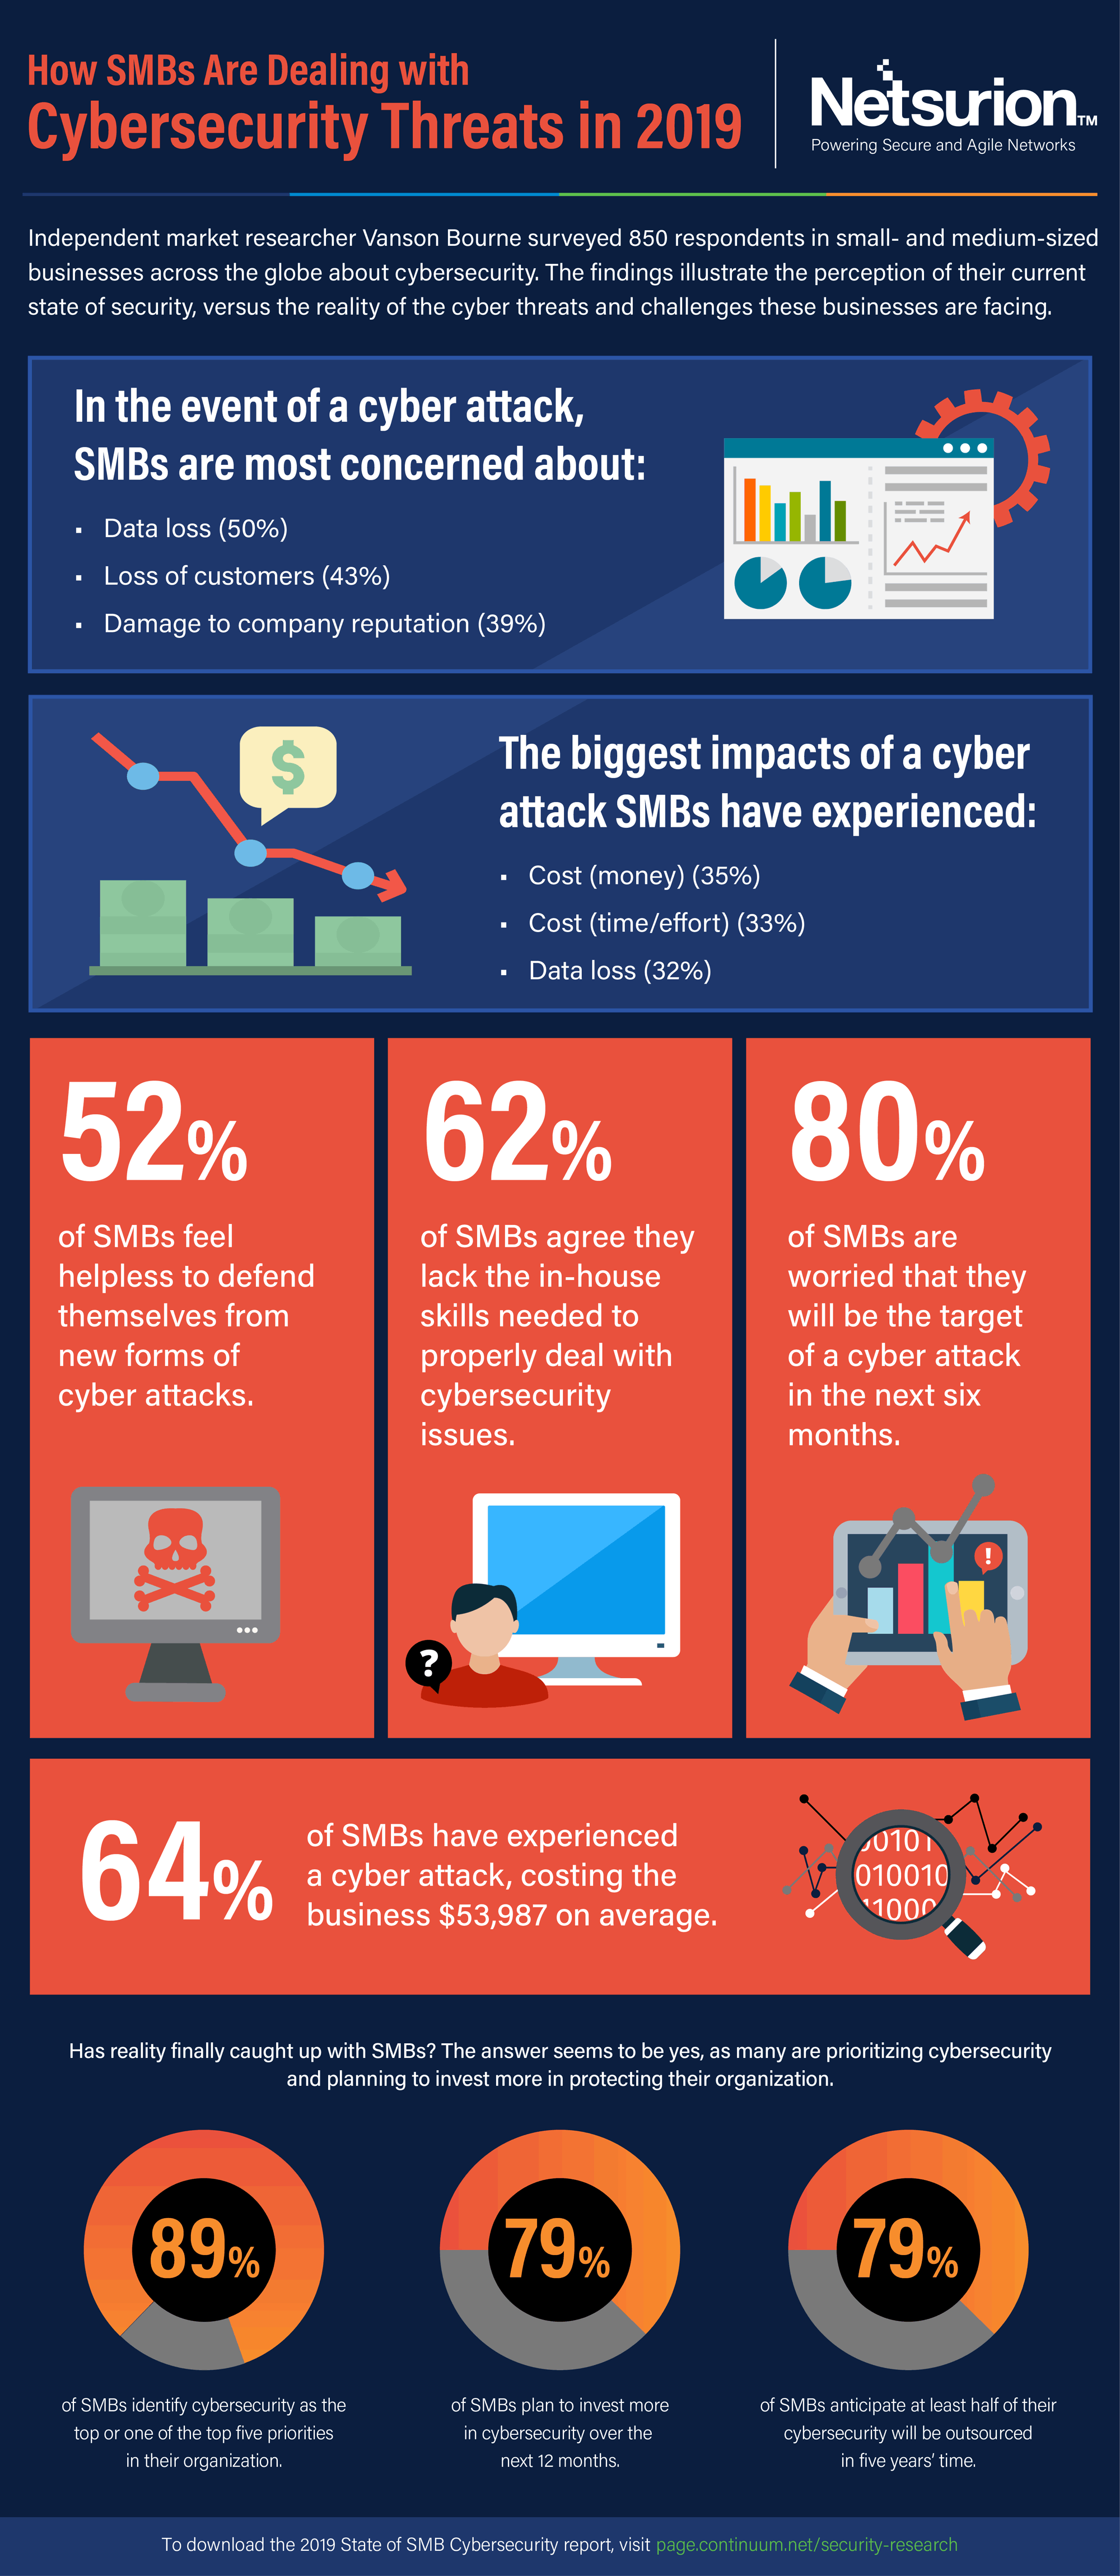 cybersecurity threats 2019 infographic1